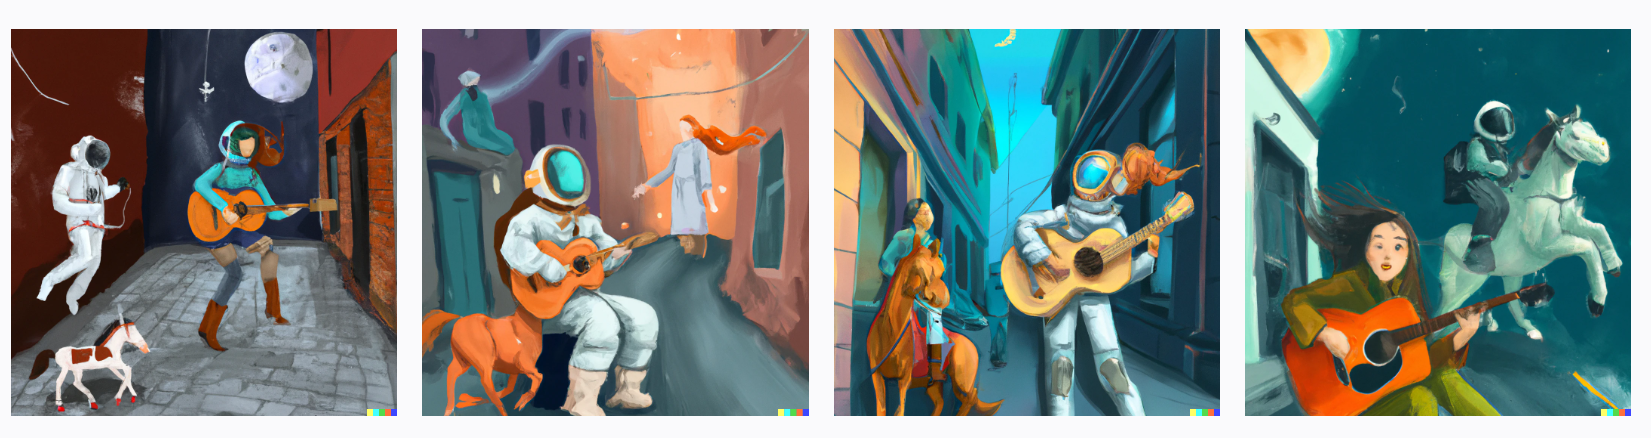 a girl plays the guitar and sings on the street, an astronaut rides by, sitting on a horse, digital art